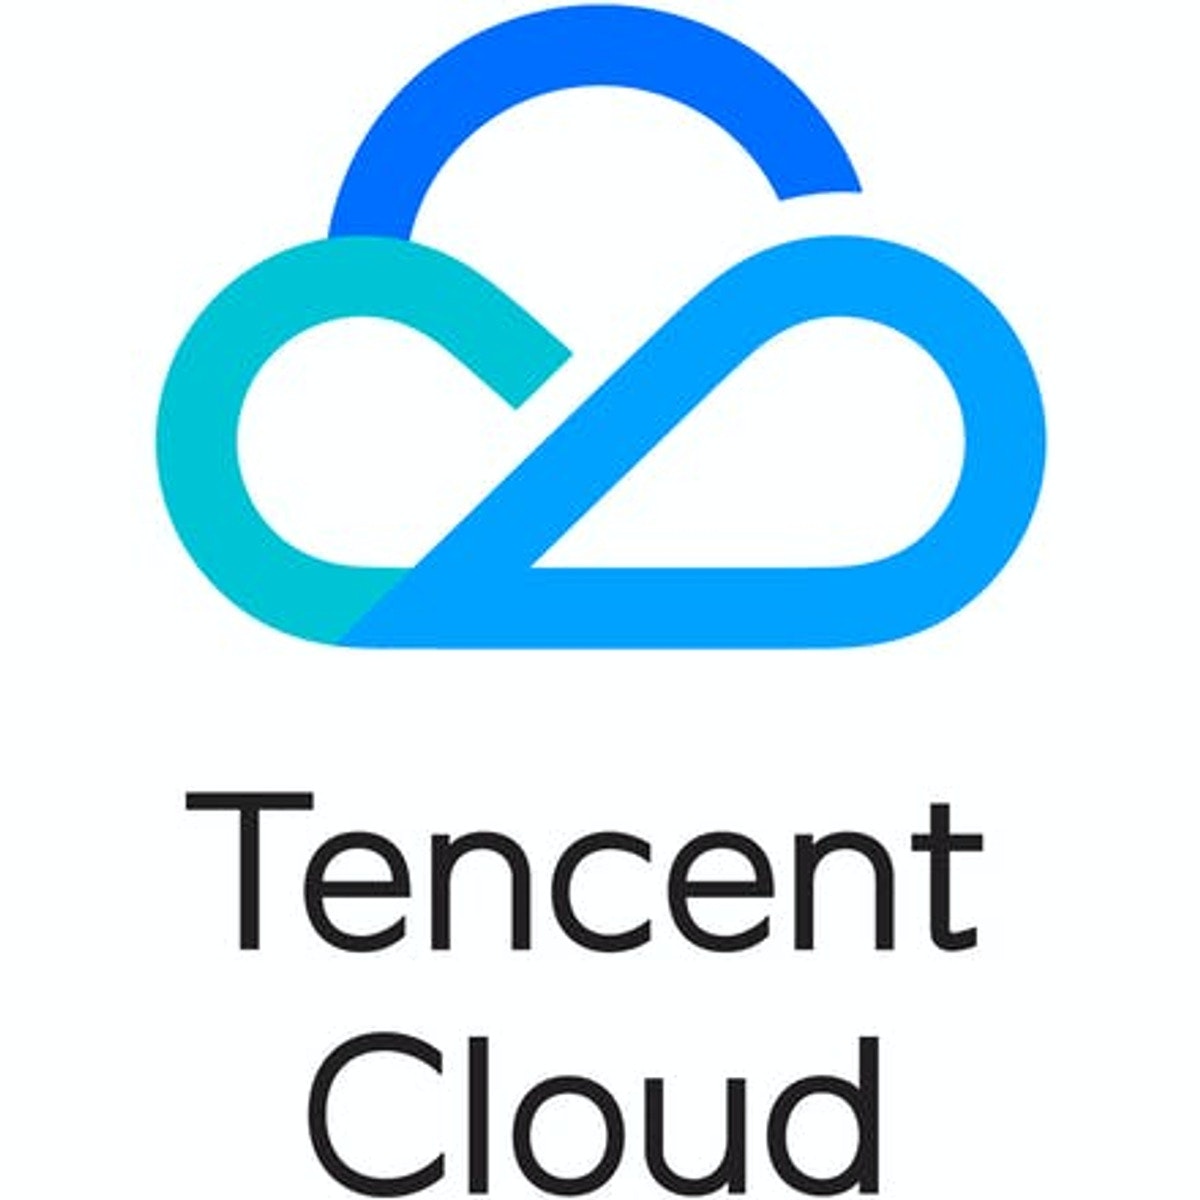 Tencent Cloud Solutions Architect Professional